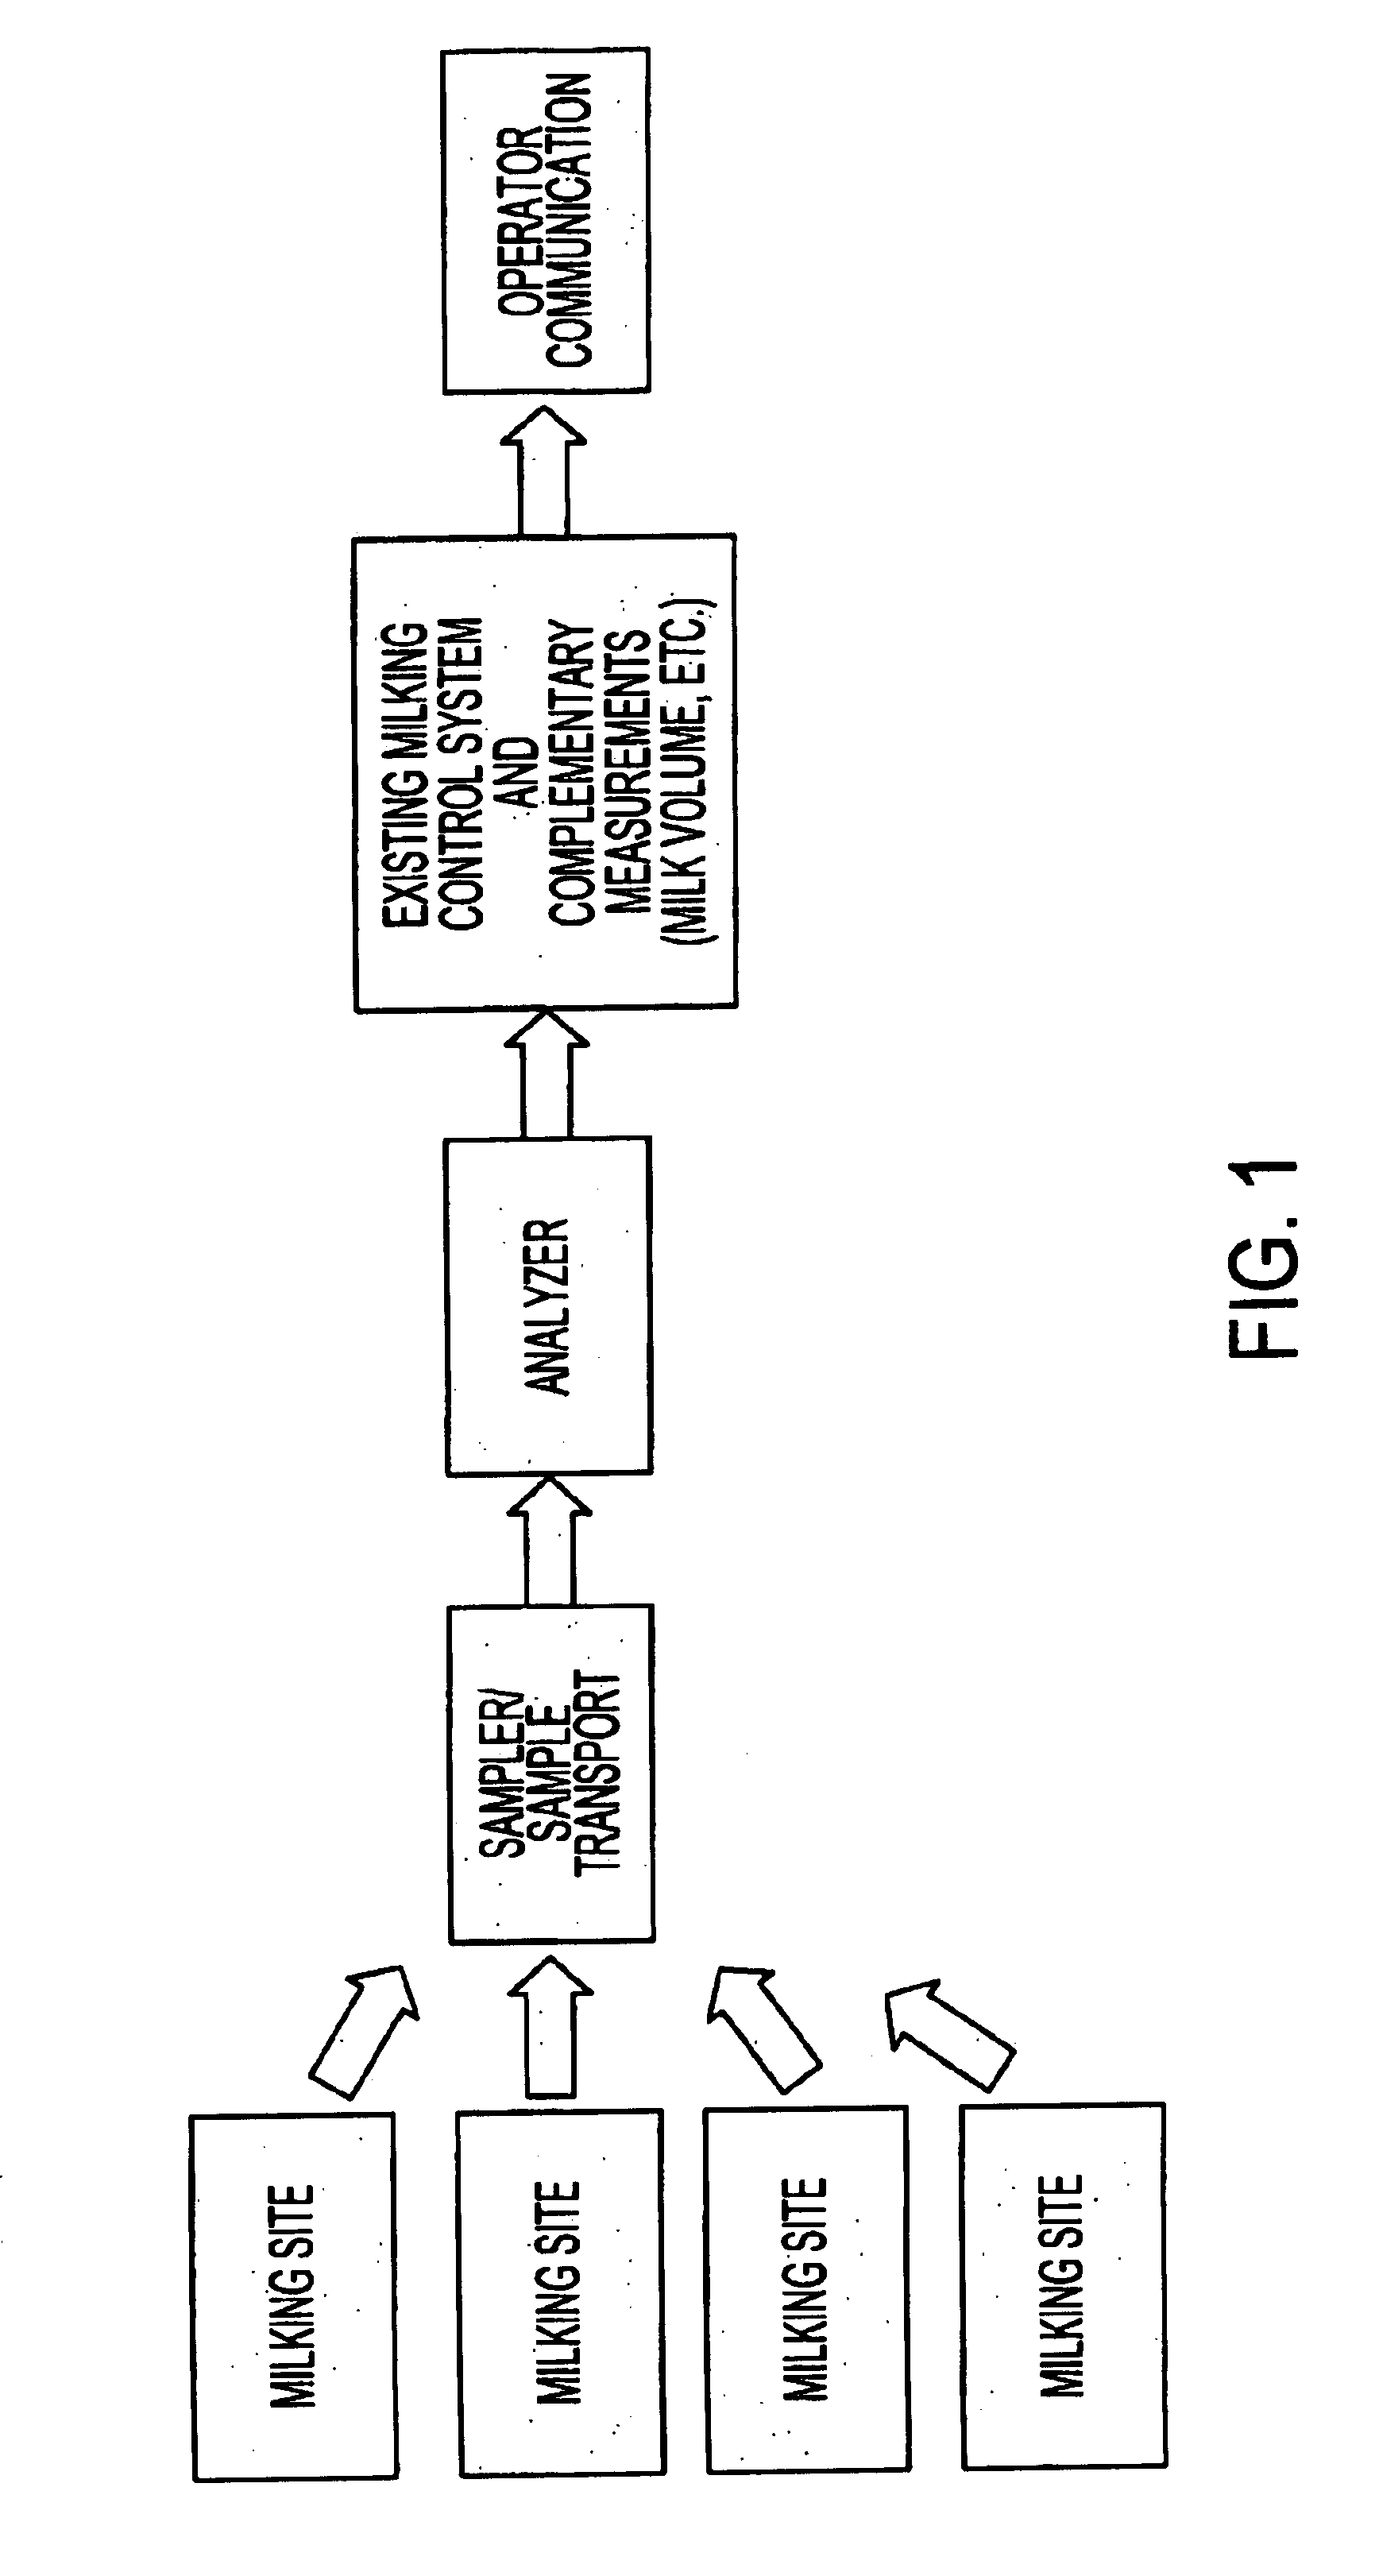 System for optimizing the production performance of a milk producing animal herd